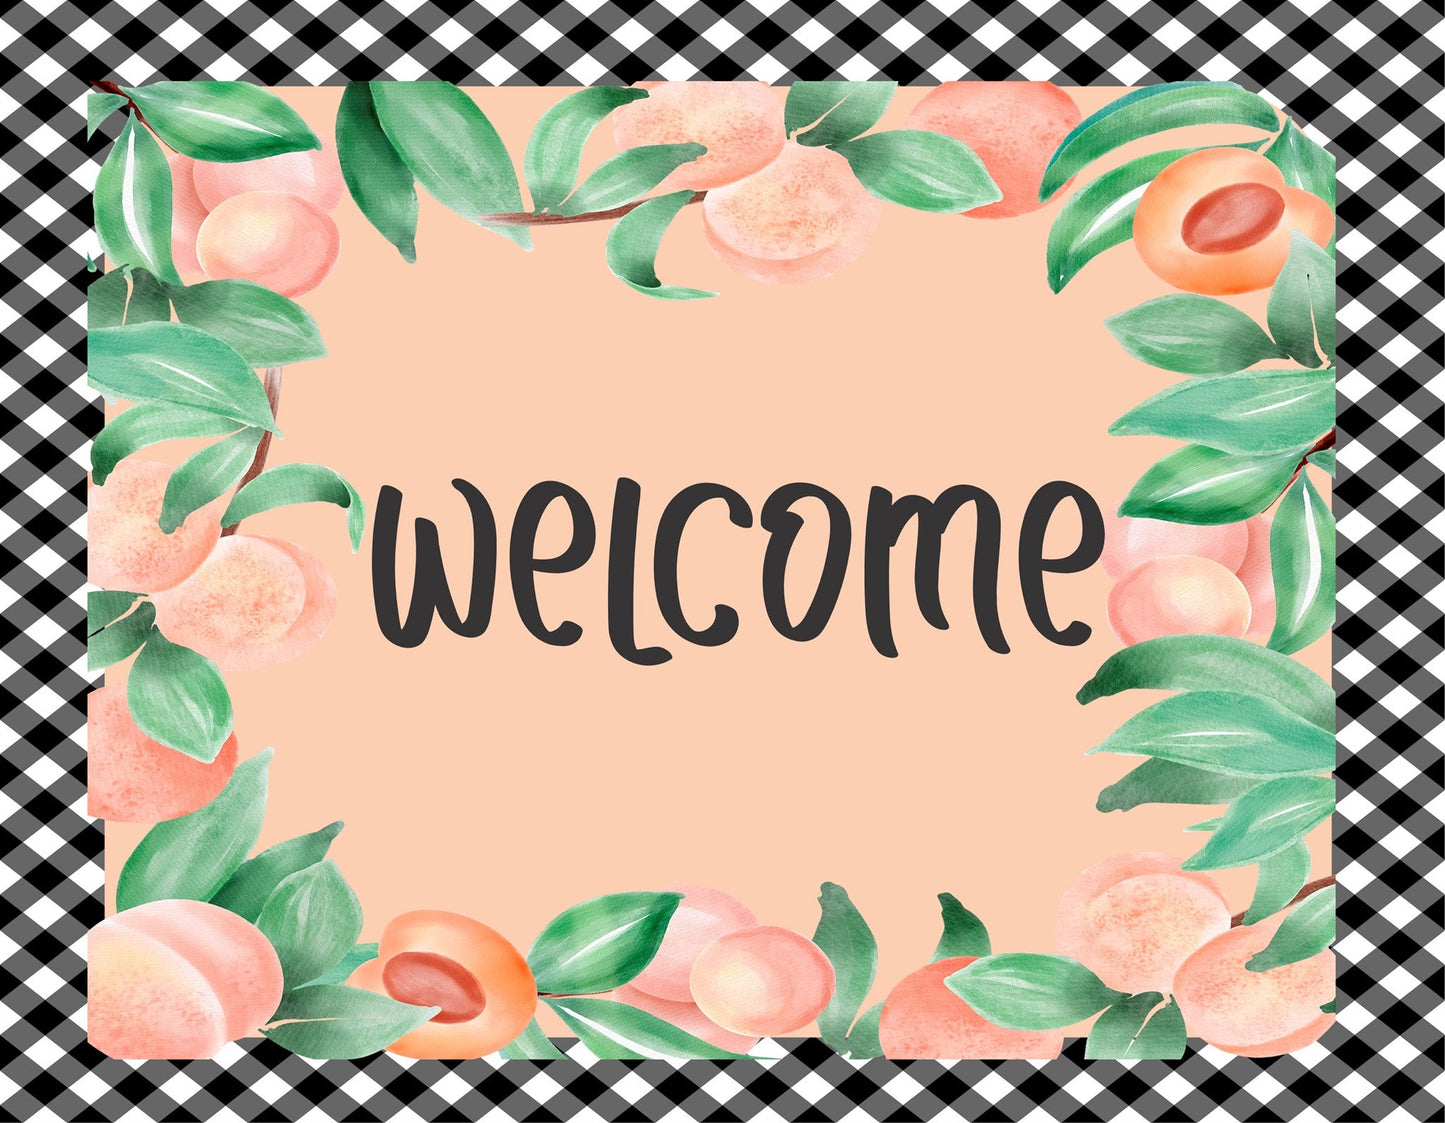 Welcome Peaches Black and White Check